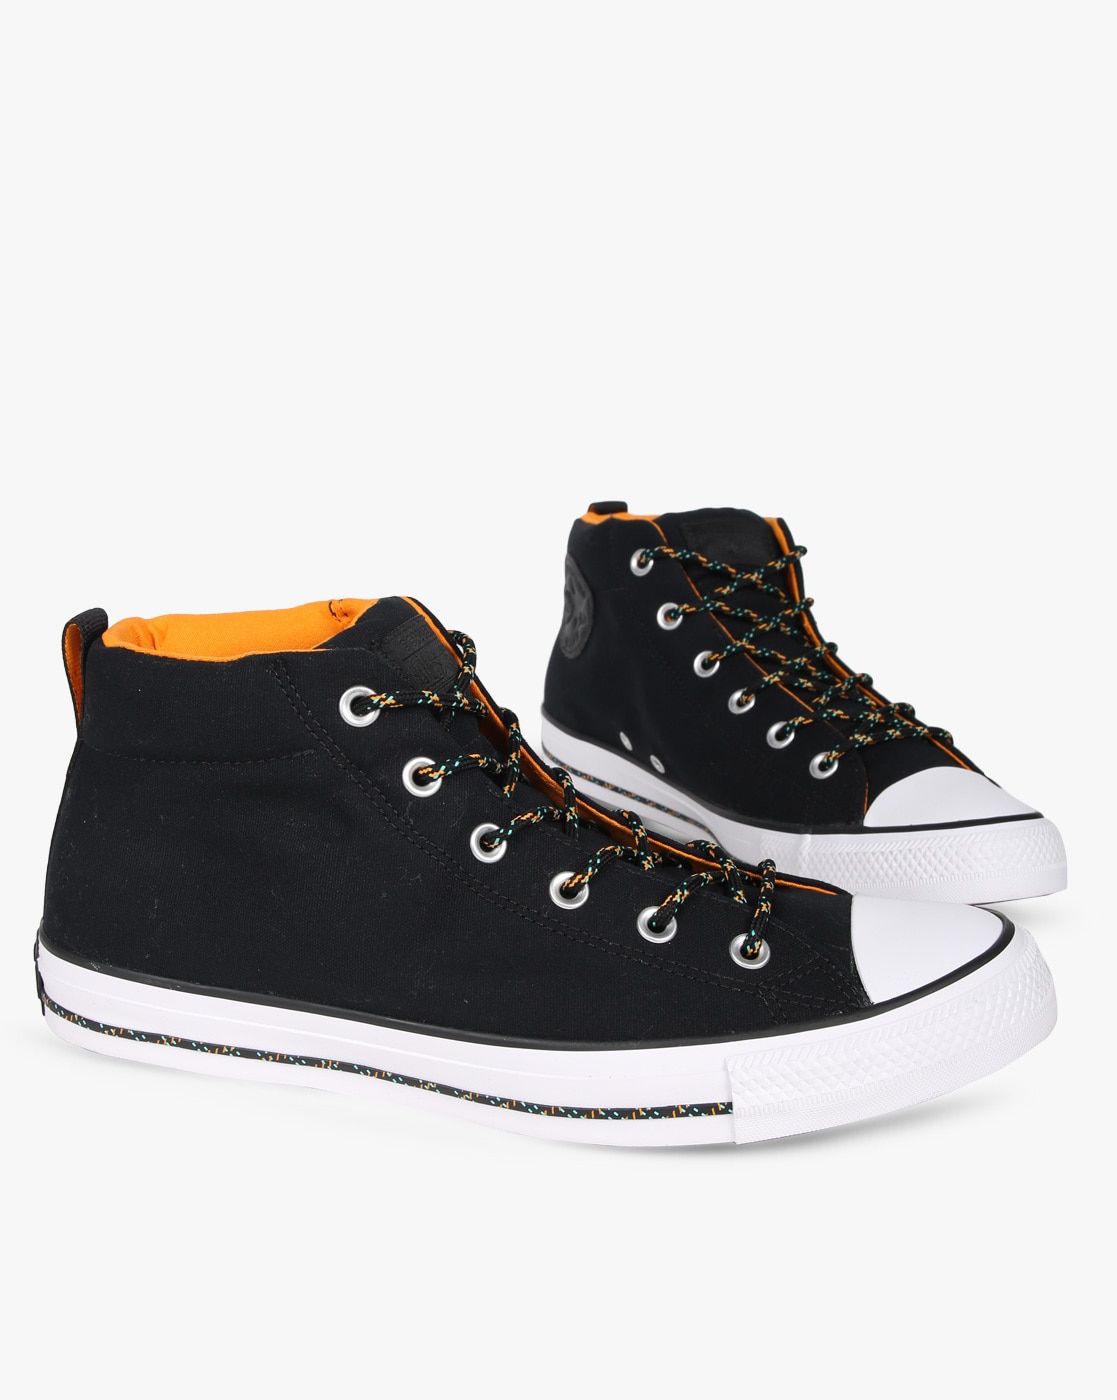 converse shoes for men india